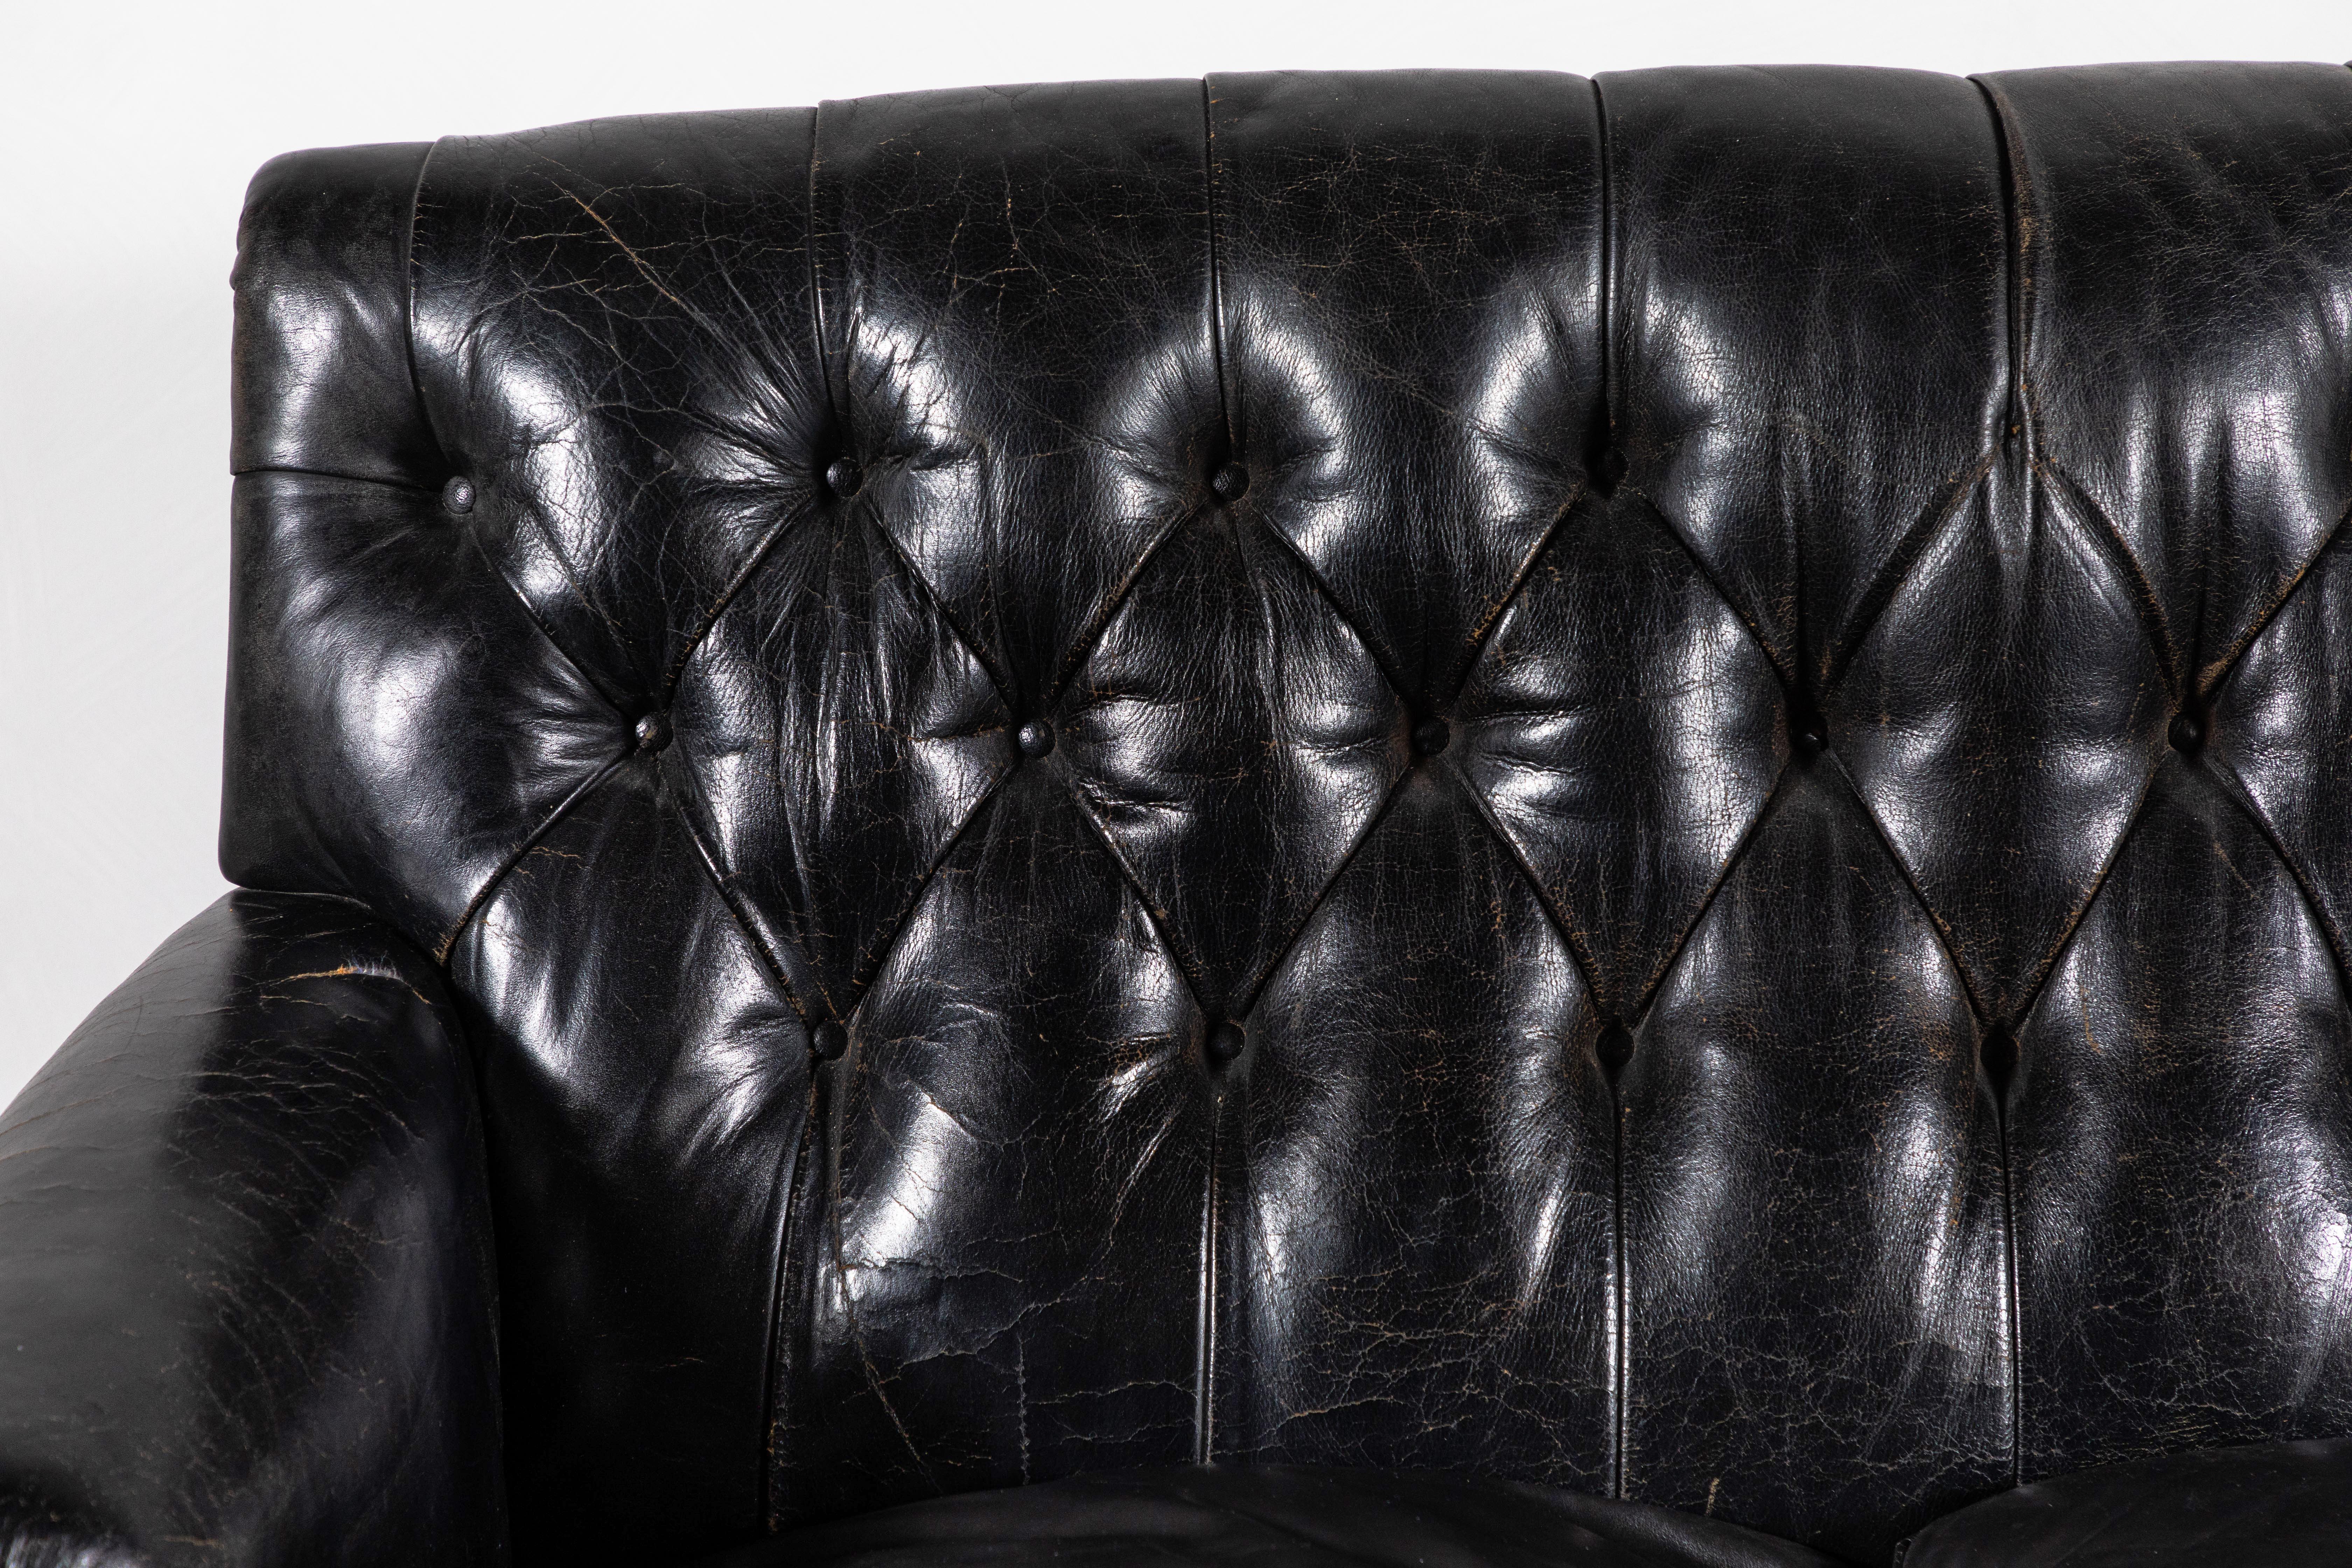 Mid-20th Century Black Leather Tufted Sofa with Tufting and a Fringed Base